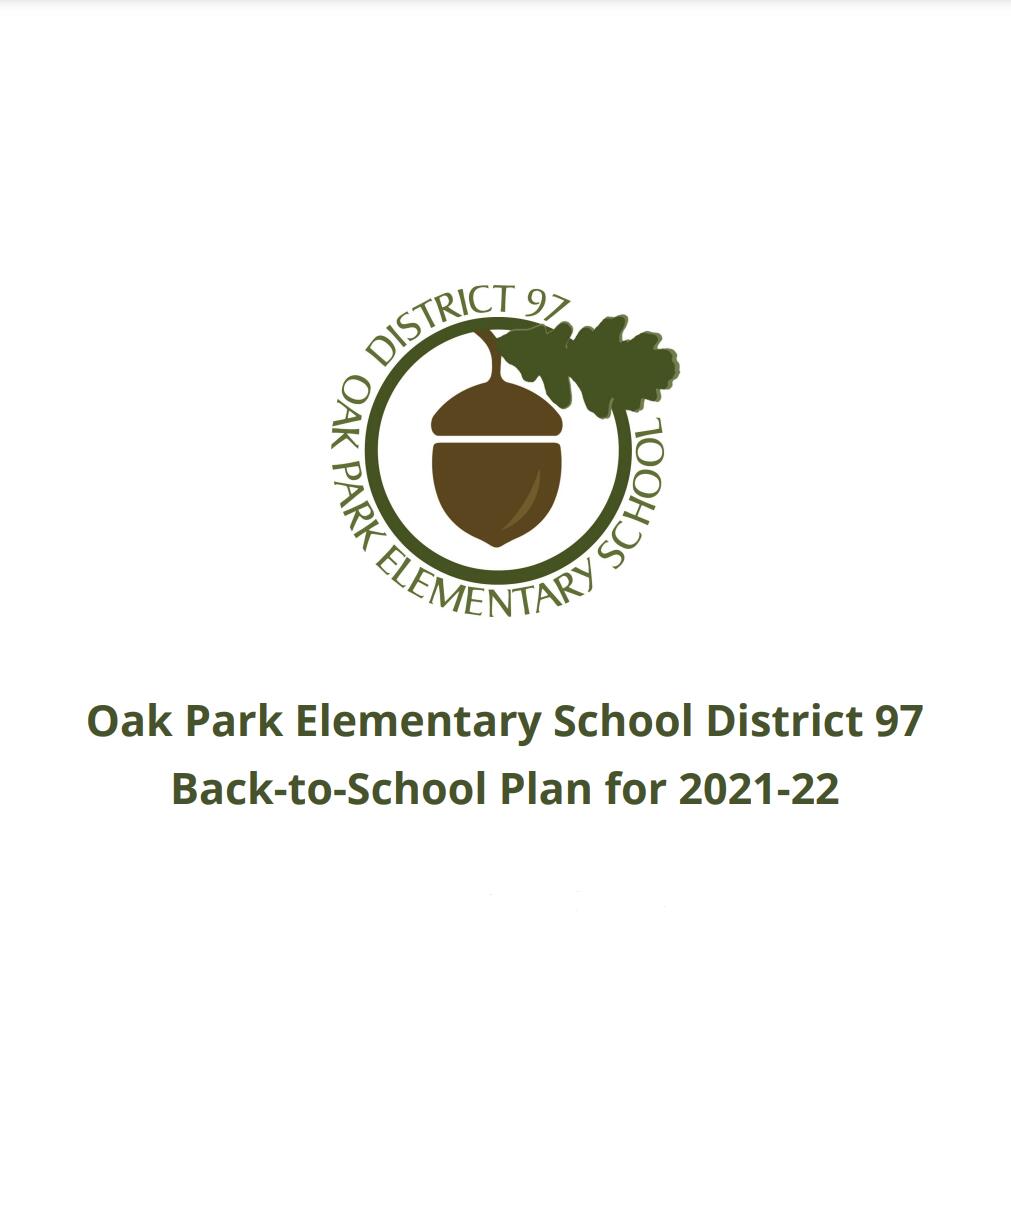 OP97 Back-to-School plan for 2021-22